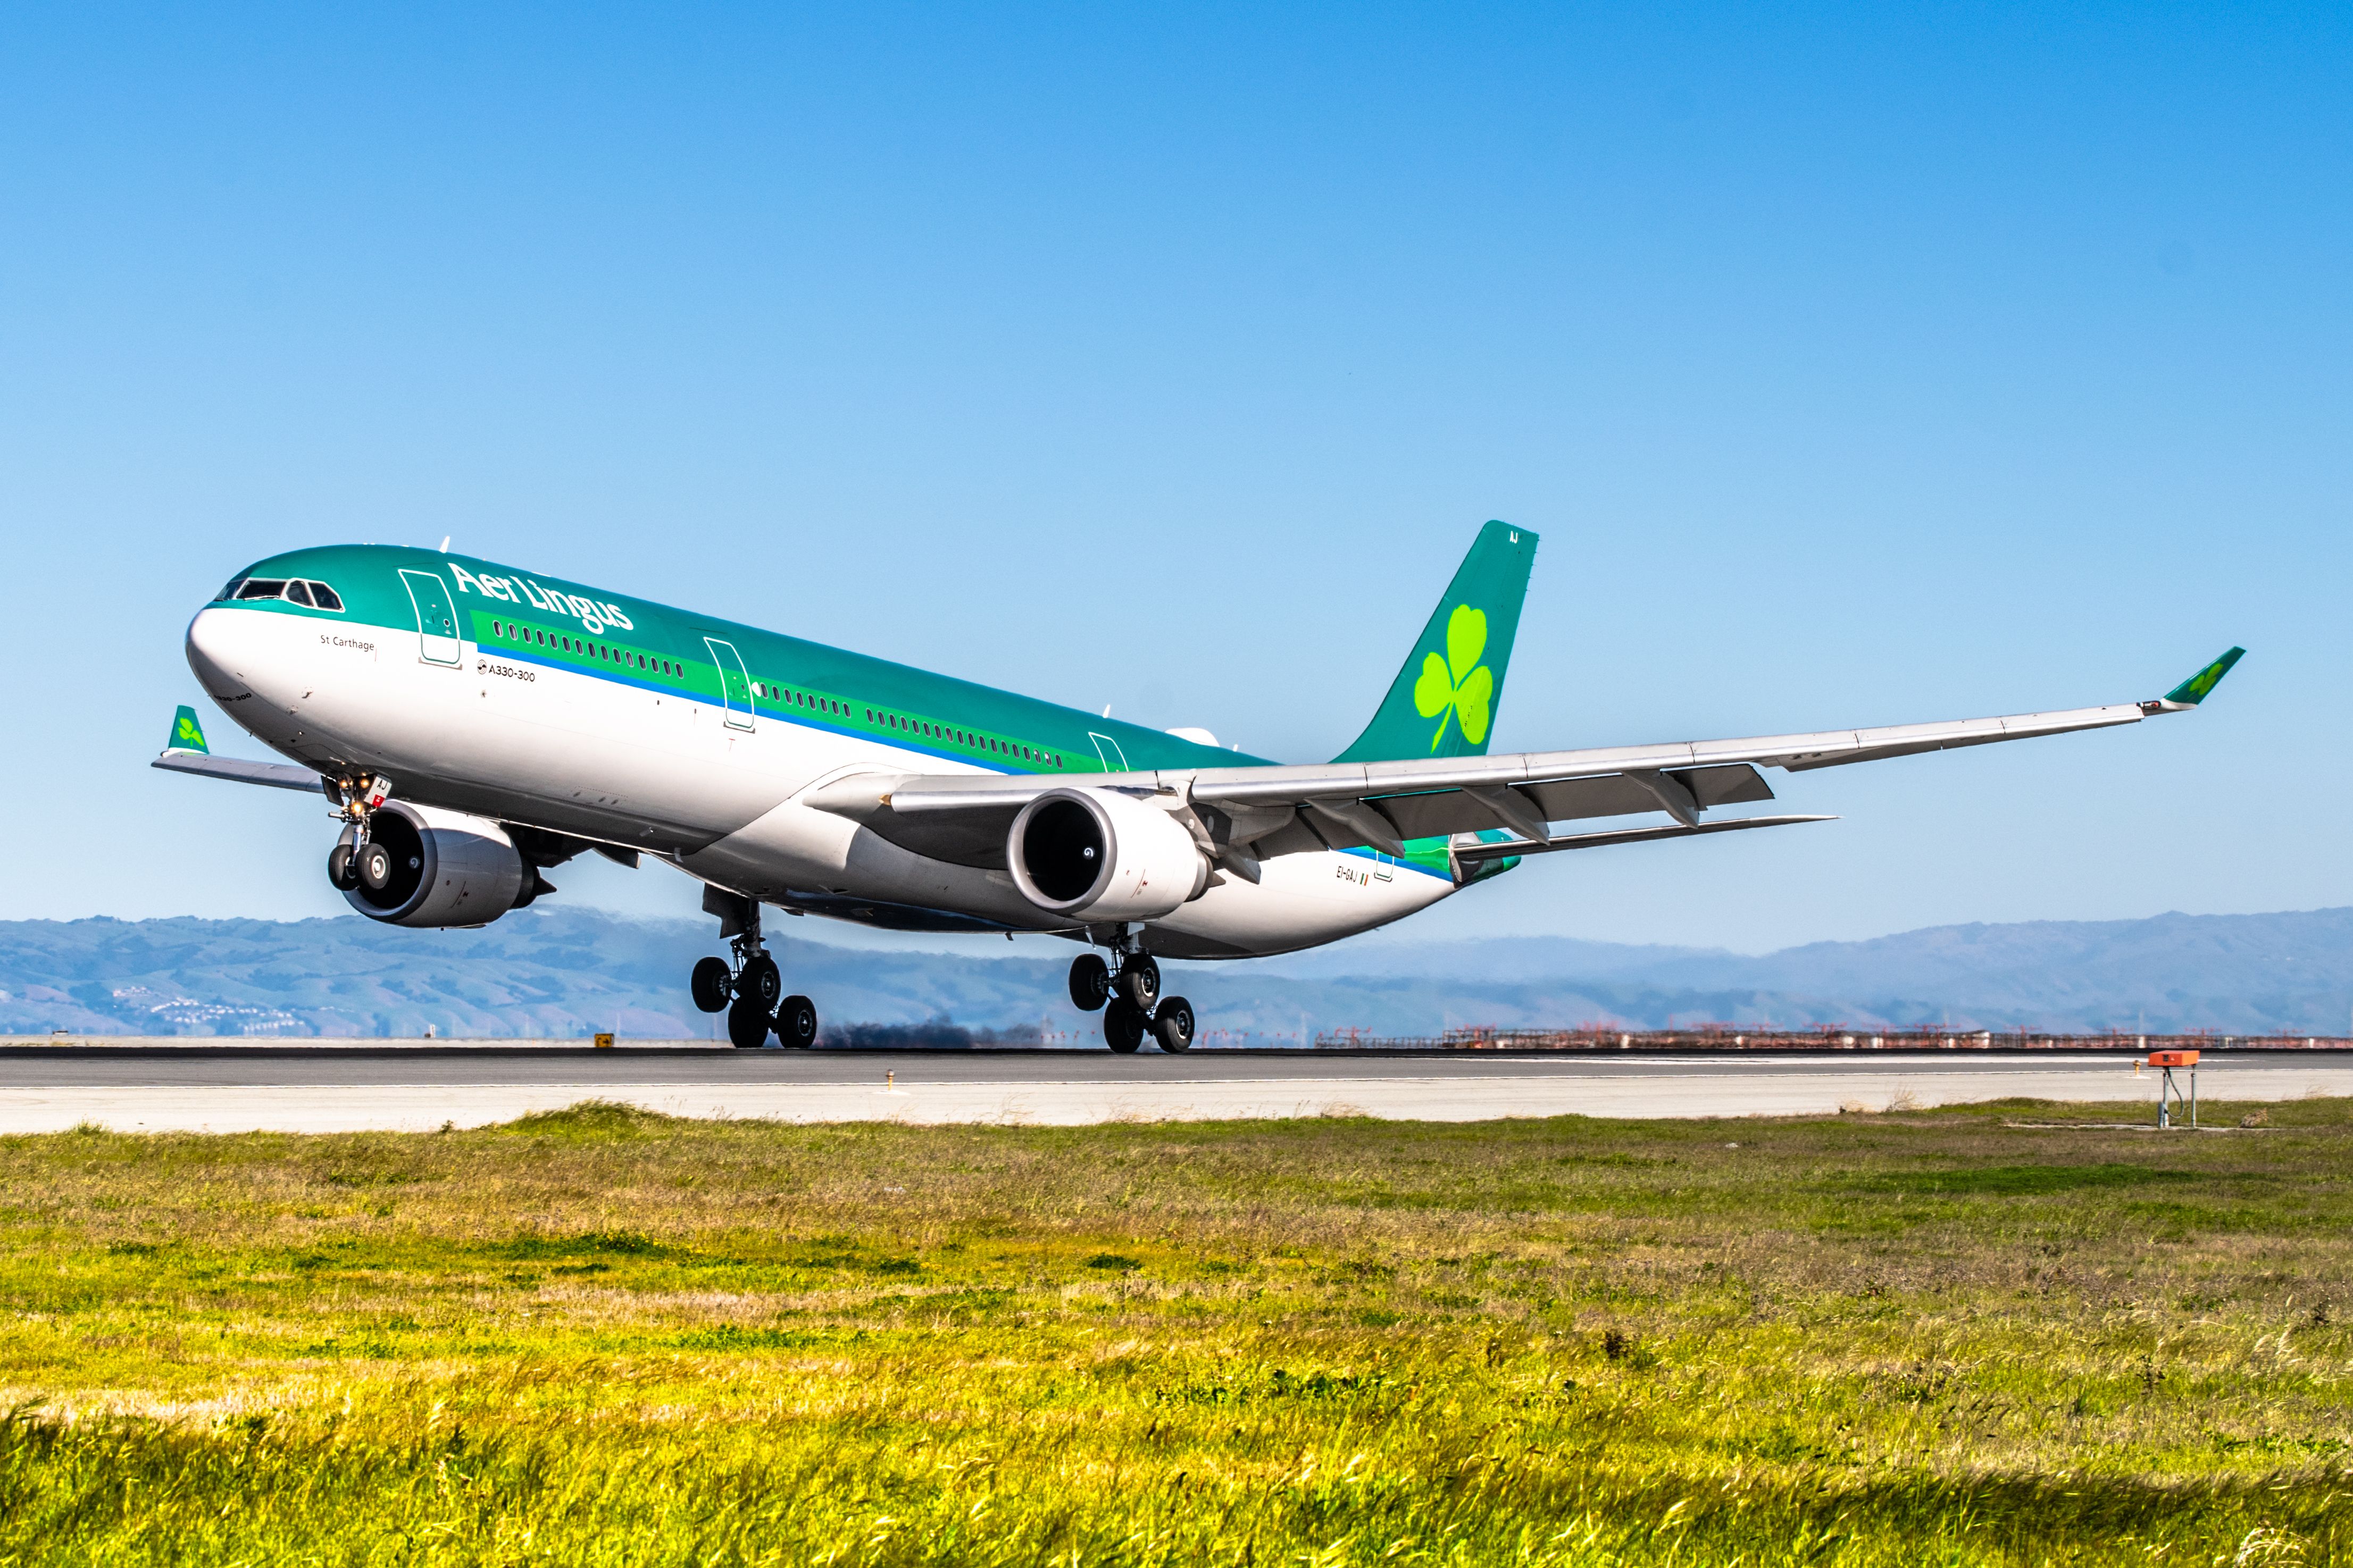 An Aer Lingus Airbus A330-302 just above a runway.